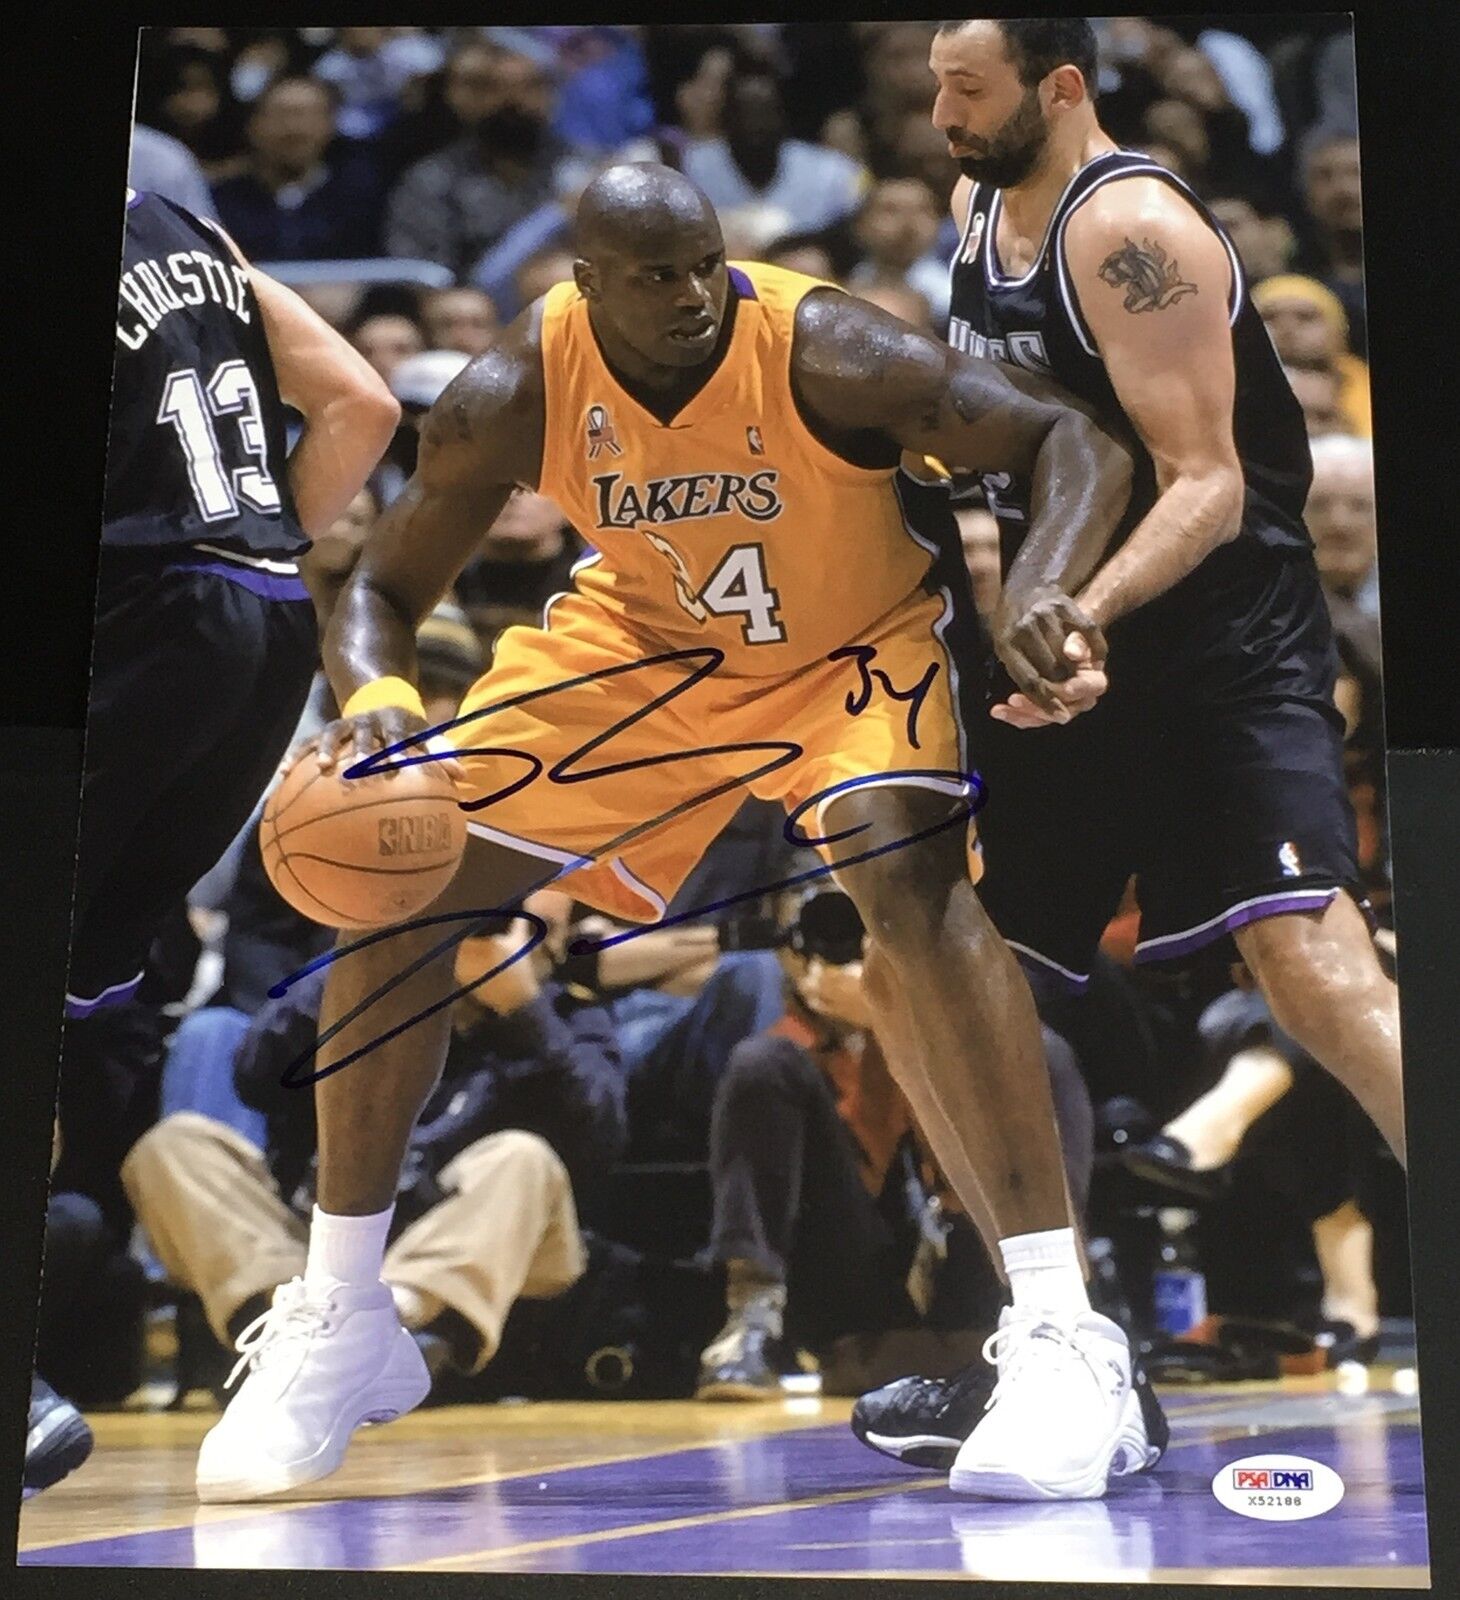 SHAQUILLE O'NEAL SIGNED AUTOGRAPH RARE LAKERS ACTION 11X14 Photo Poster painting PSA/DNA X52188